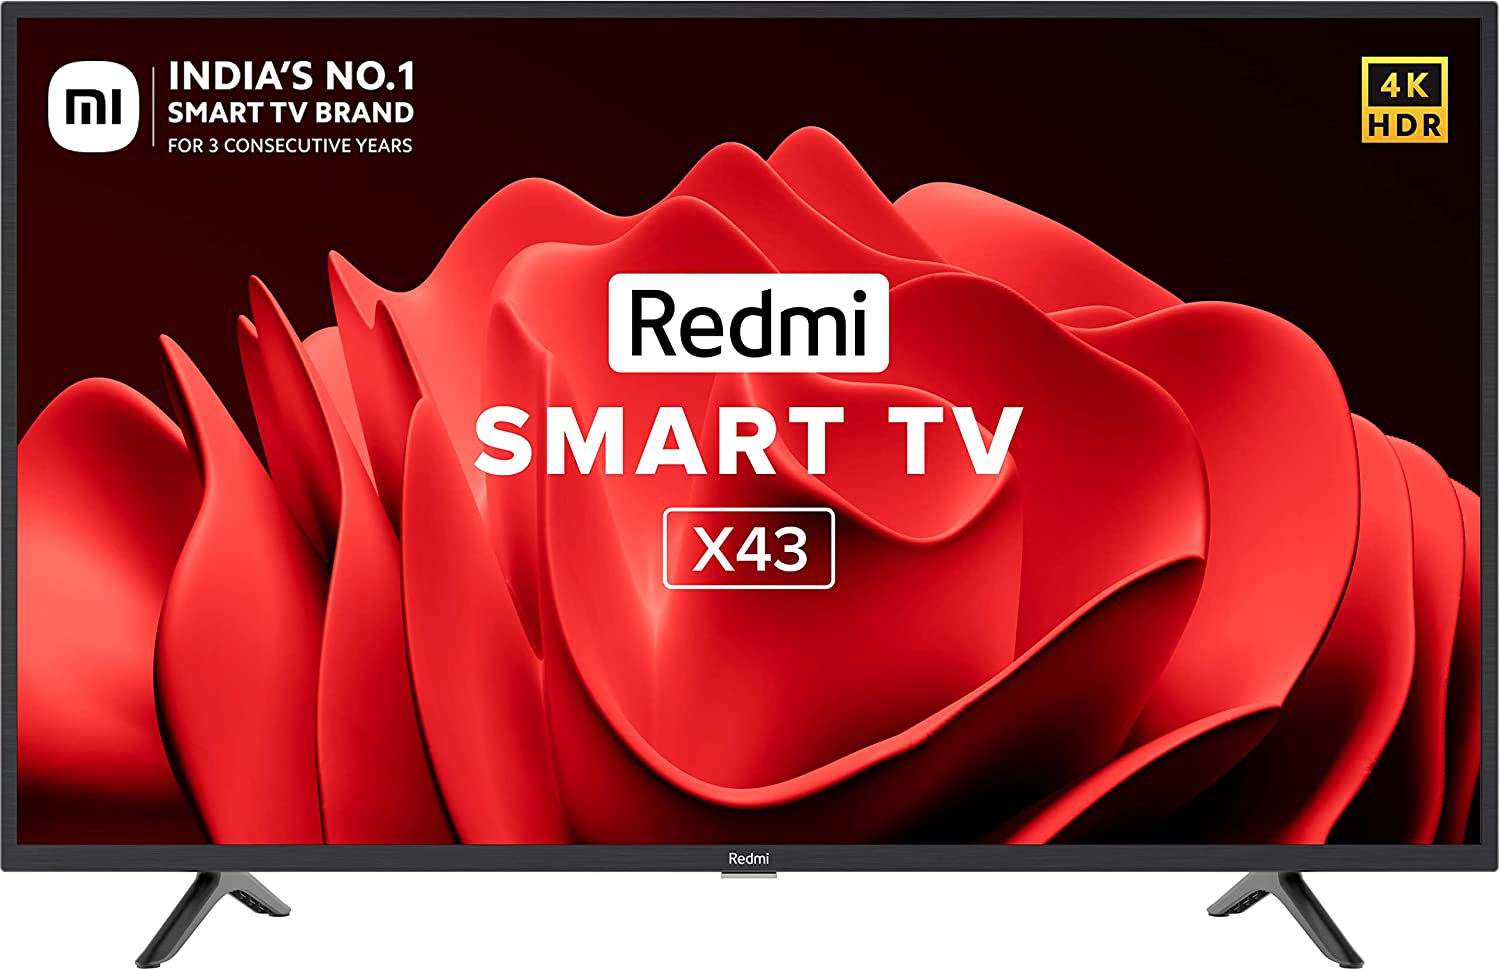 Redmi 43 inches Android Smart LED TV